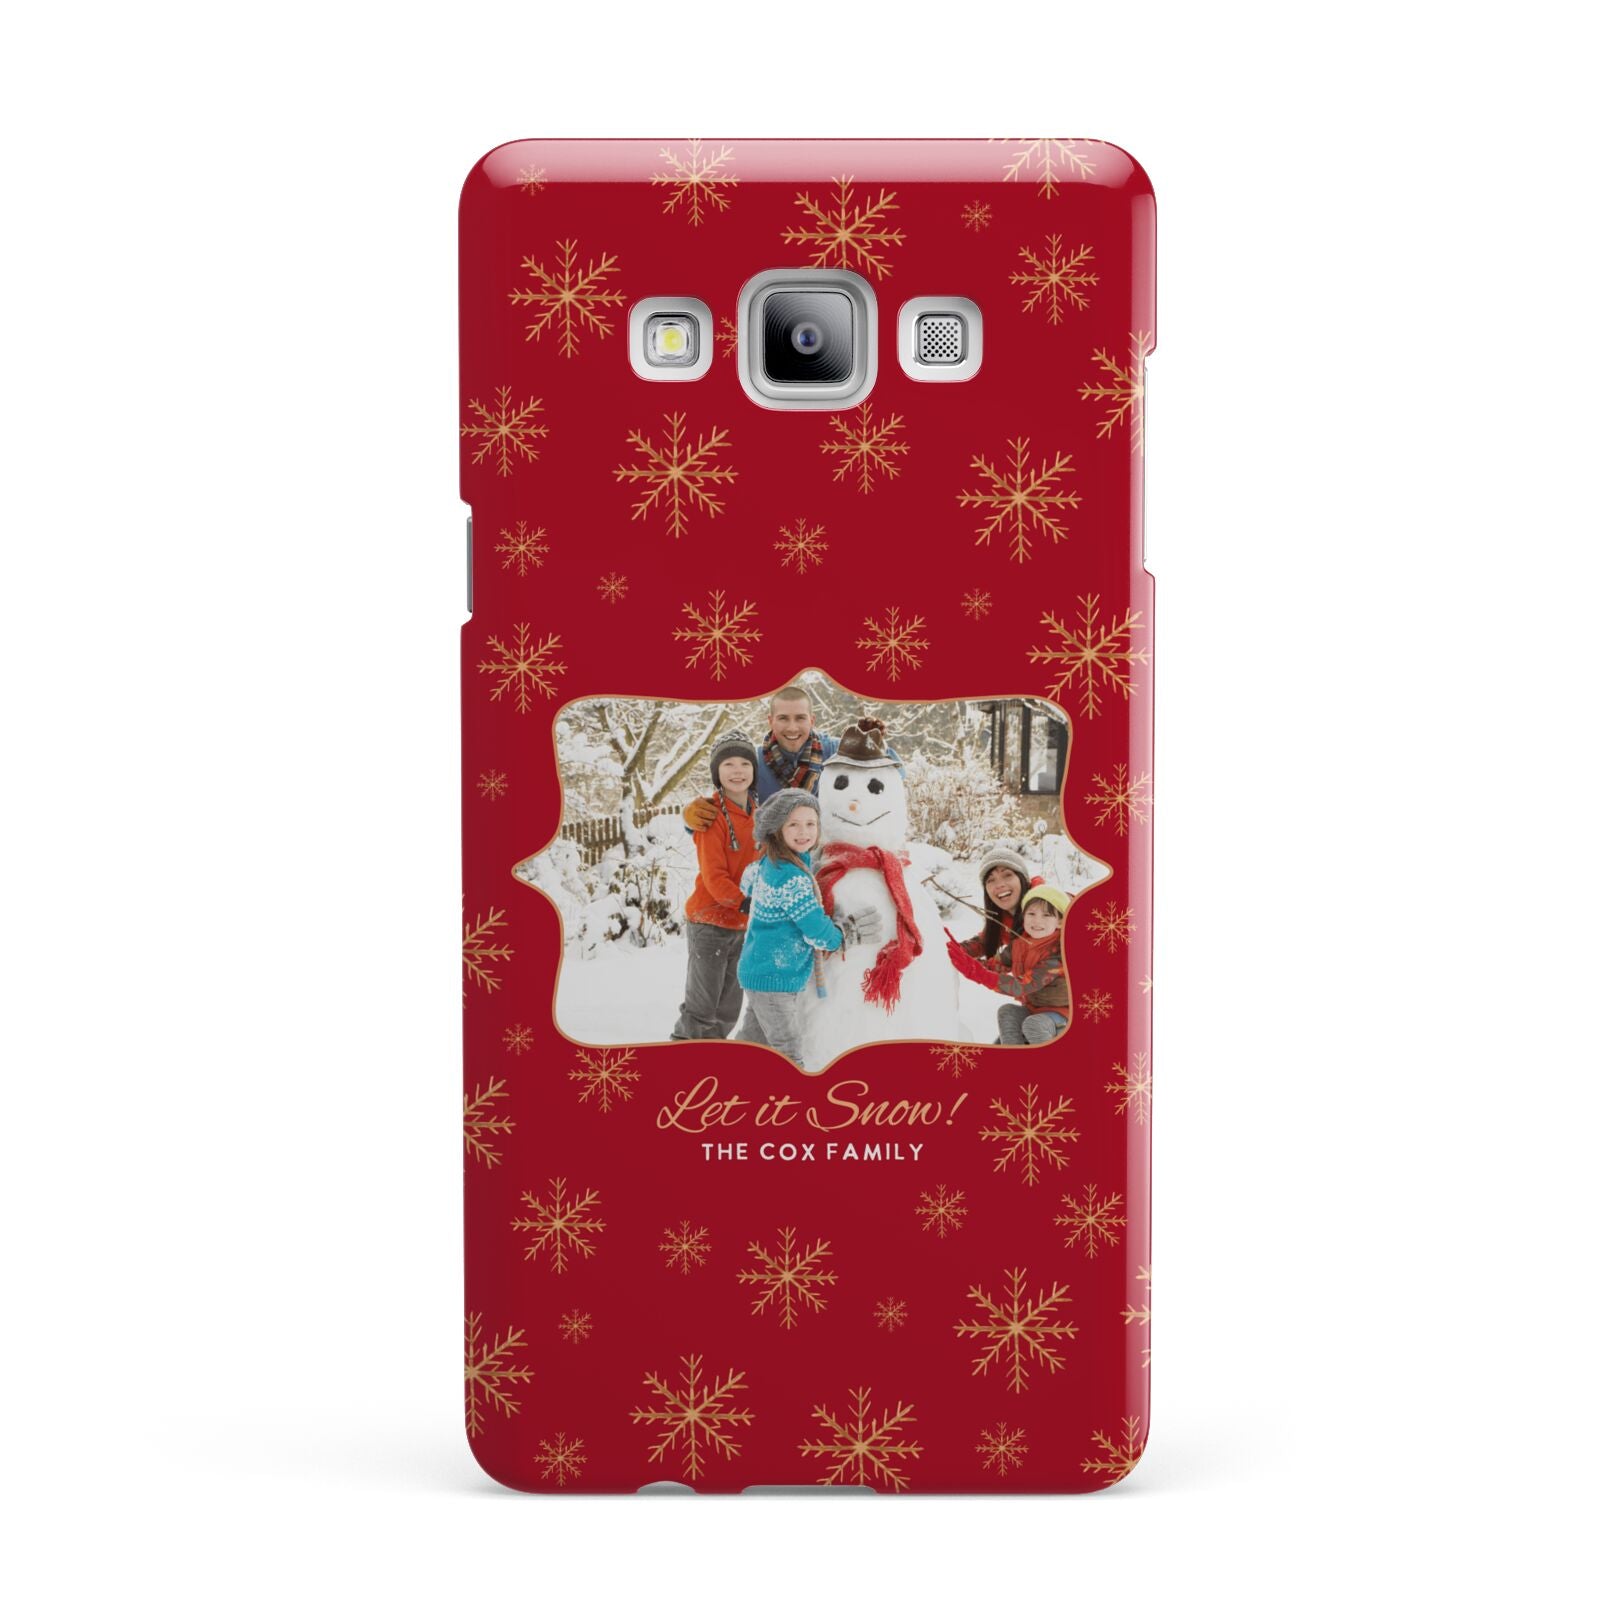 Let it Snow Christmas Photo Upload Samsung Galaxy A7 2015 Case